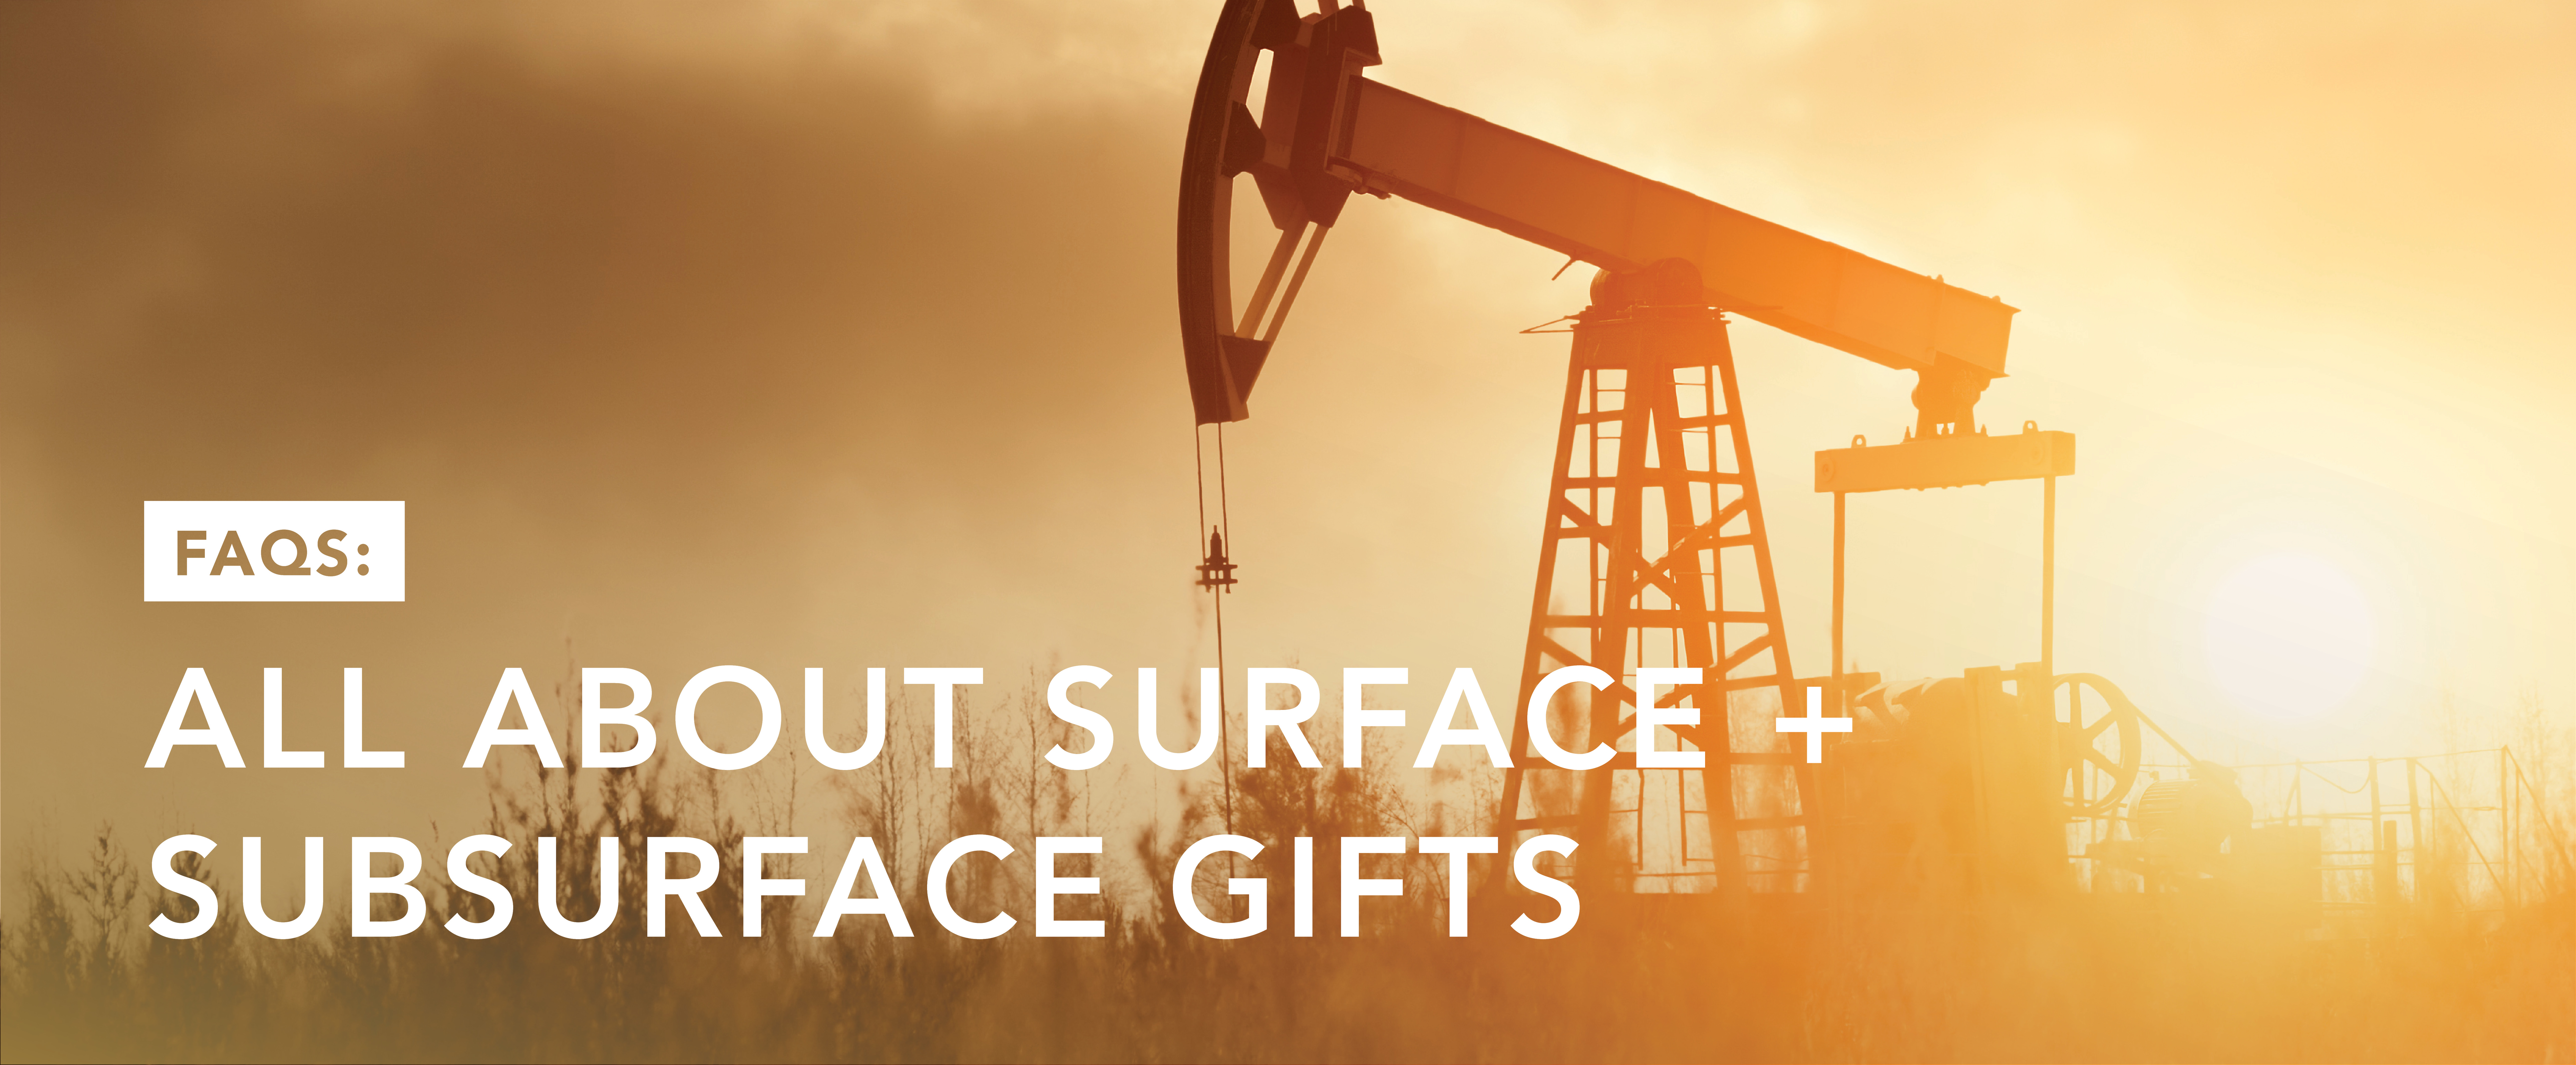 FAQS: All About Surface + Subsurface Gifts